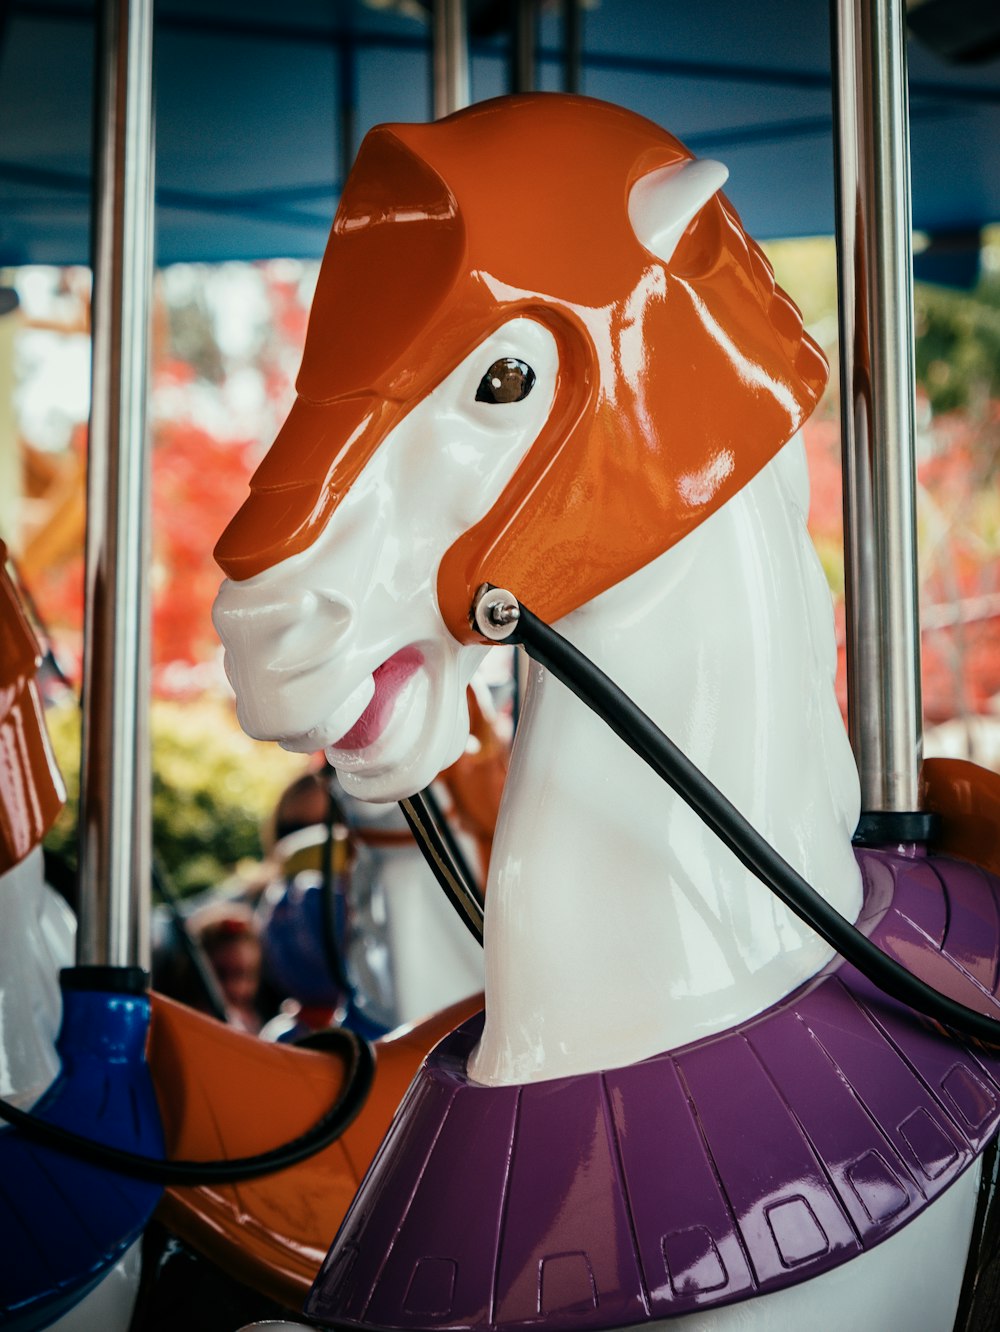 a close up of a horse on a merry go round